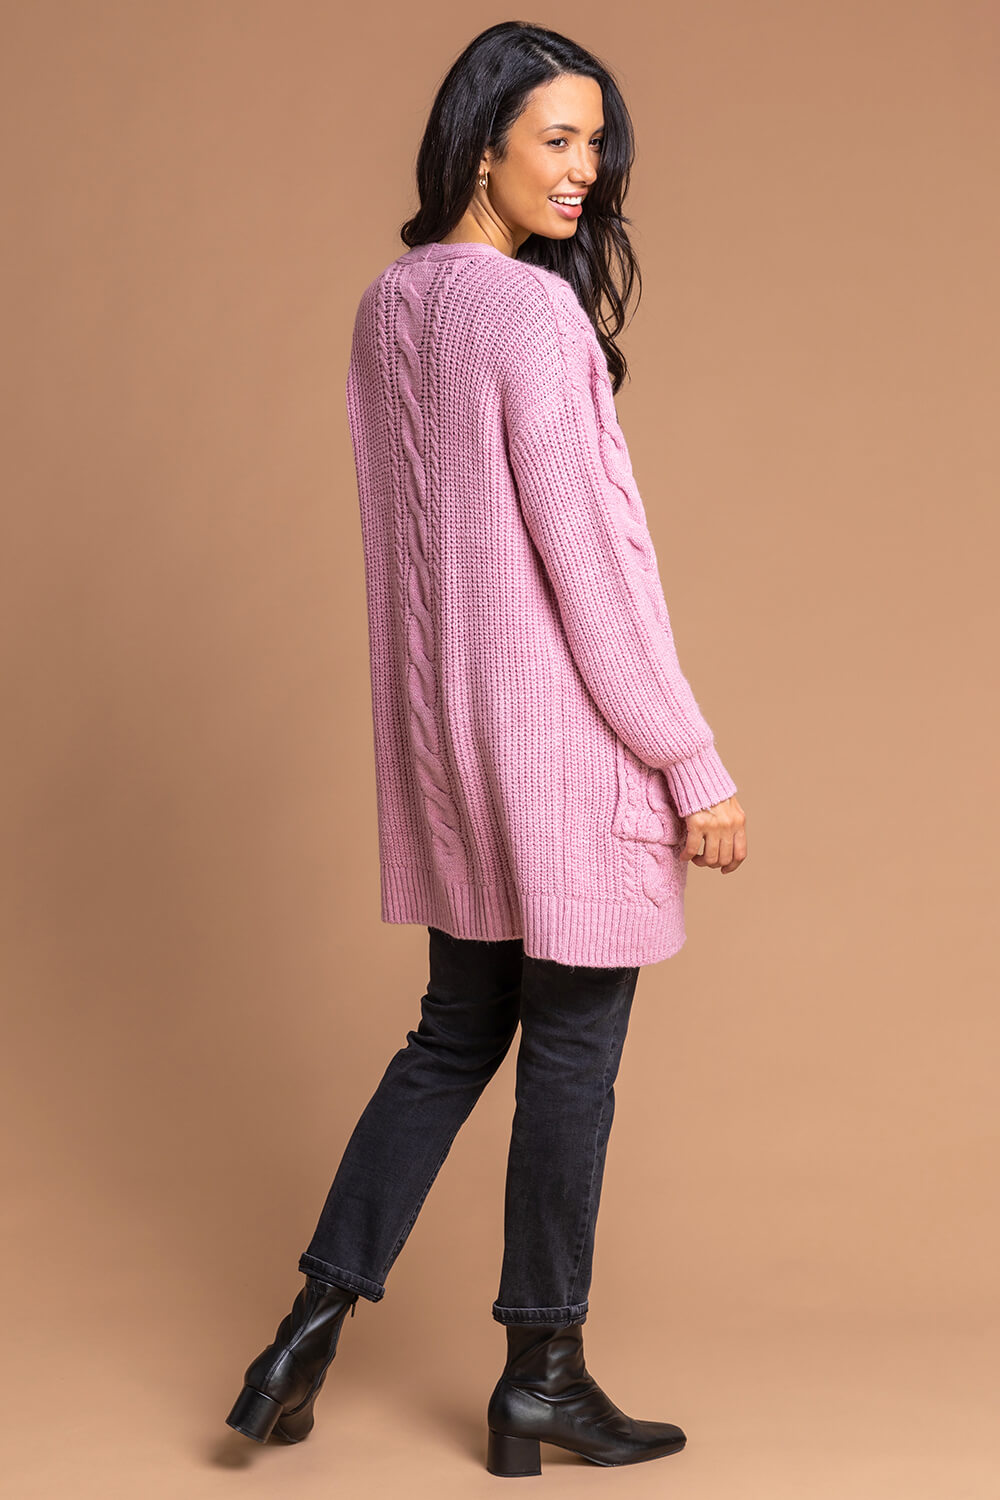 PINK Cable Knit Longline Cardigan, Image 2 of 4